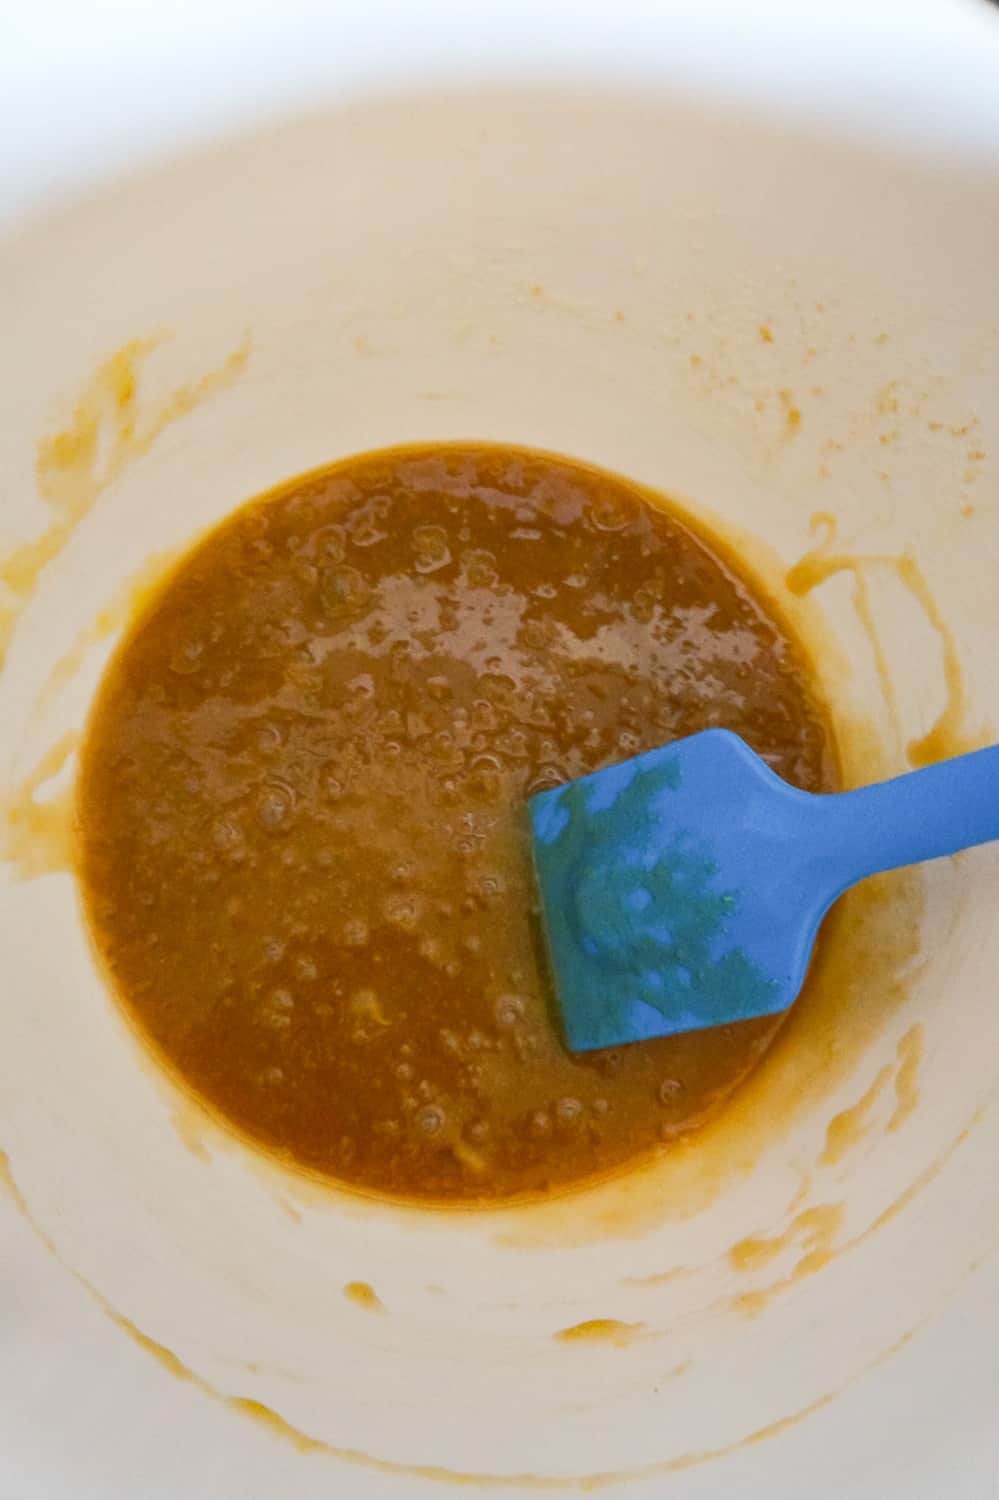 butter, egg and sugar mixture in a mixing bowl